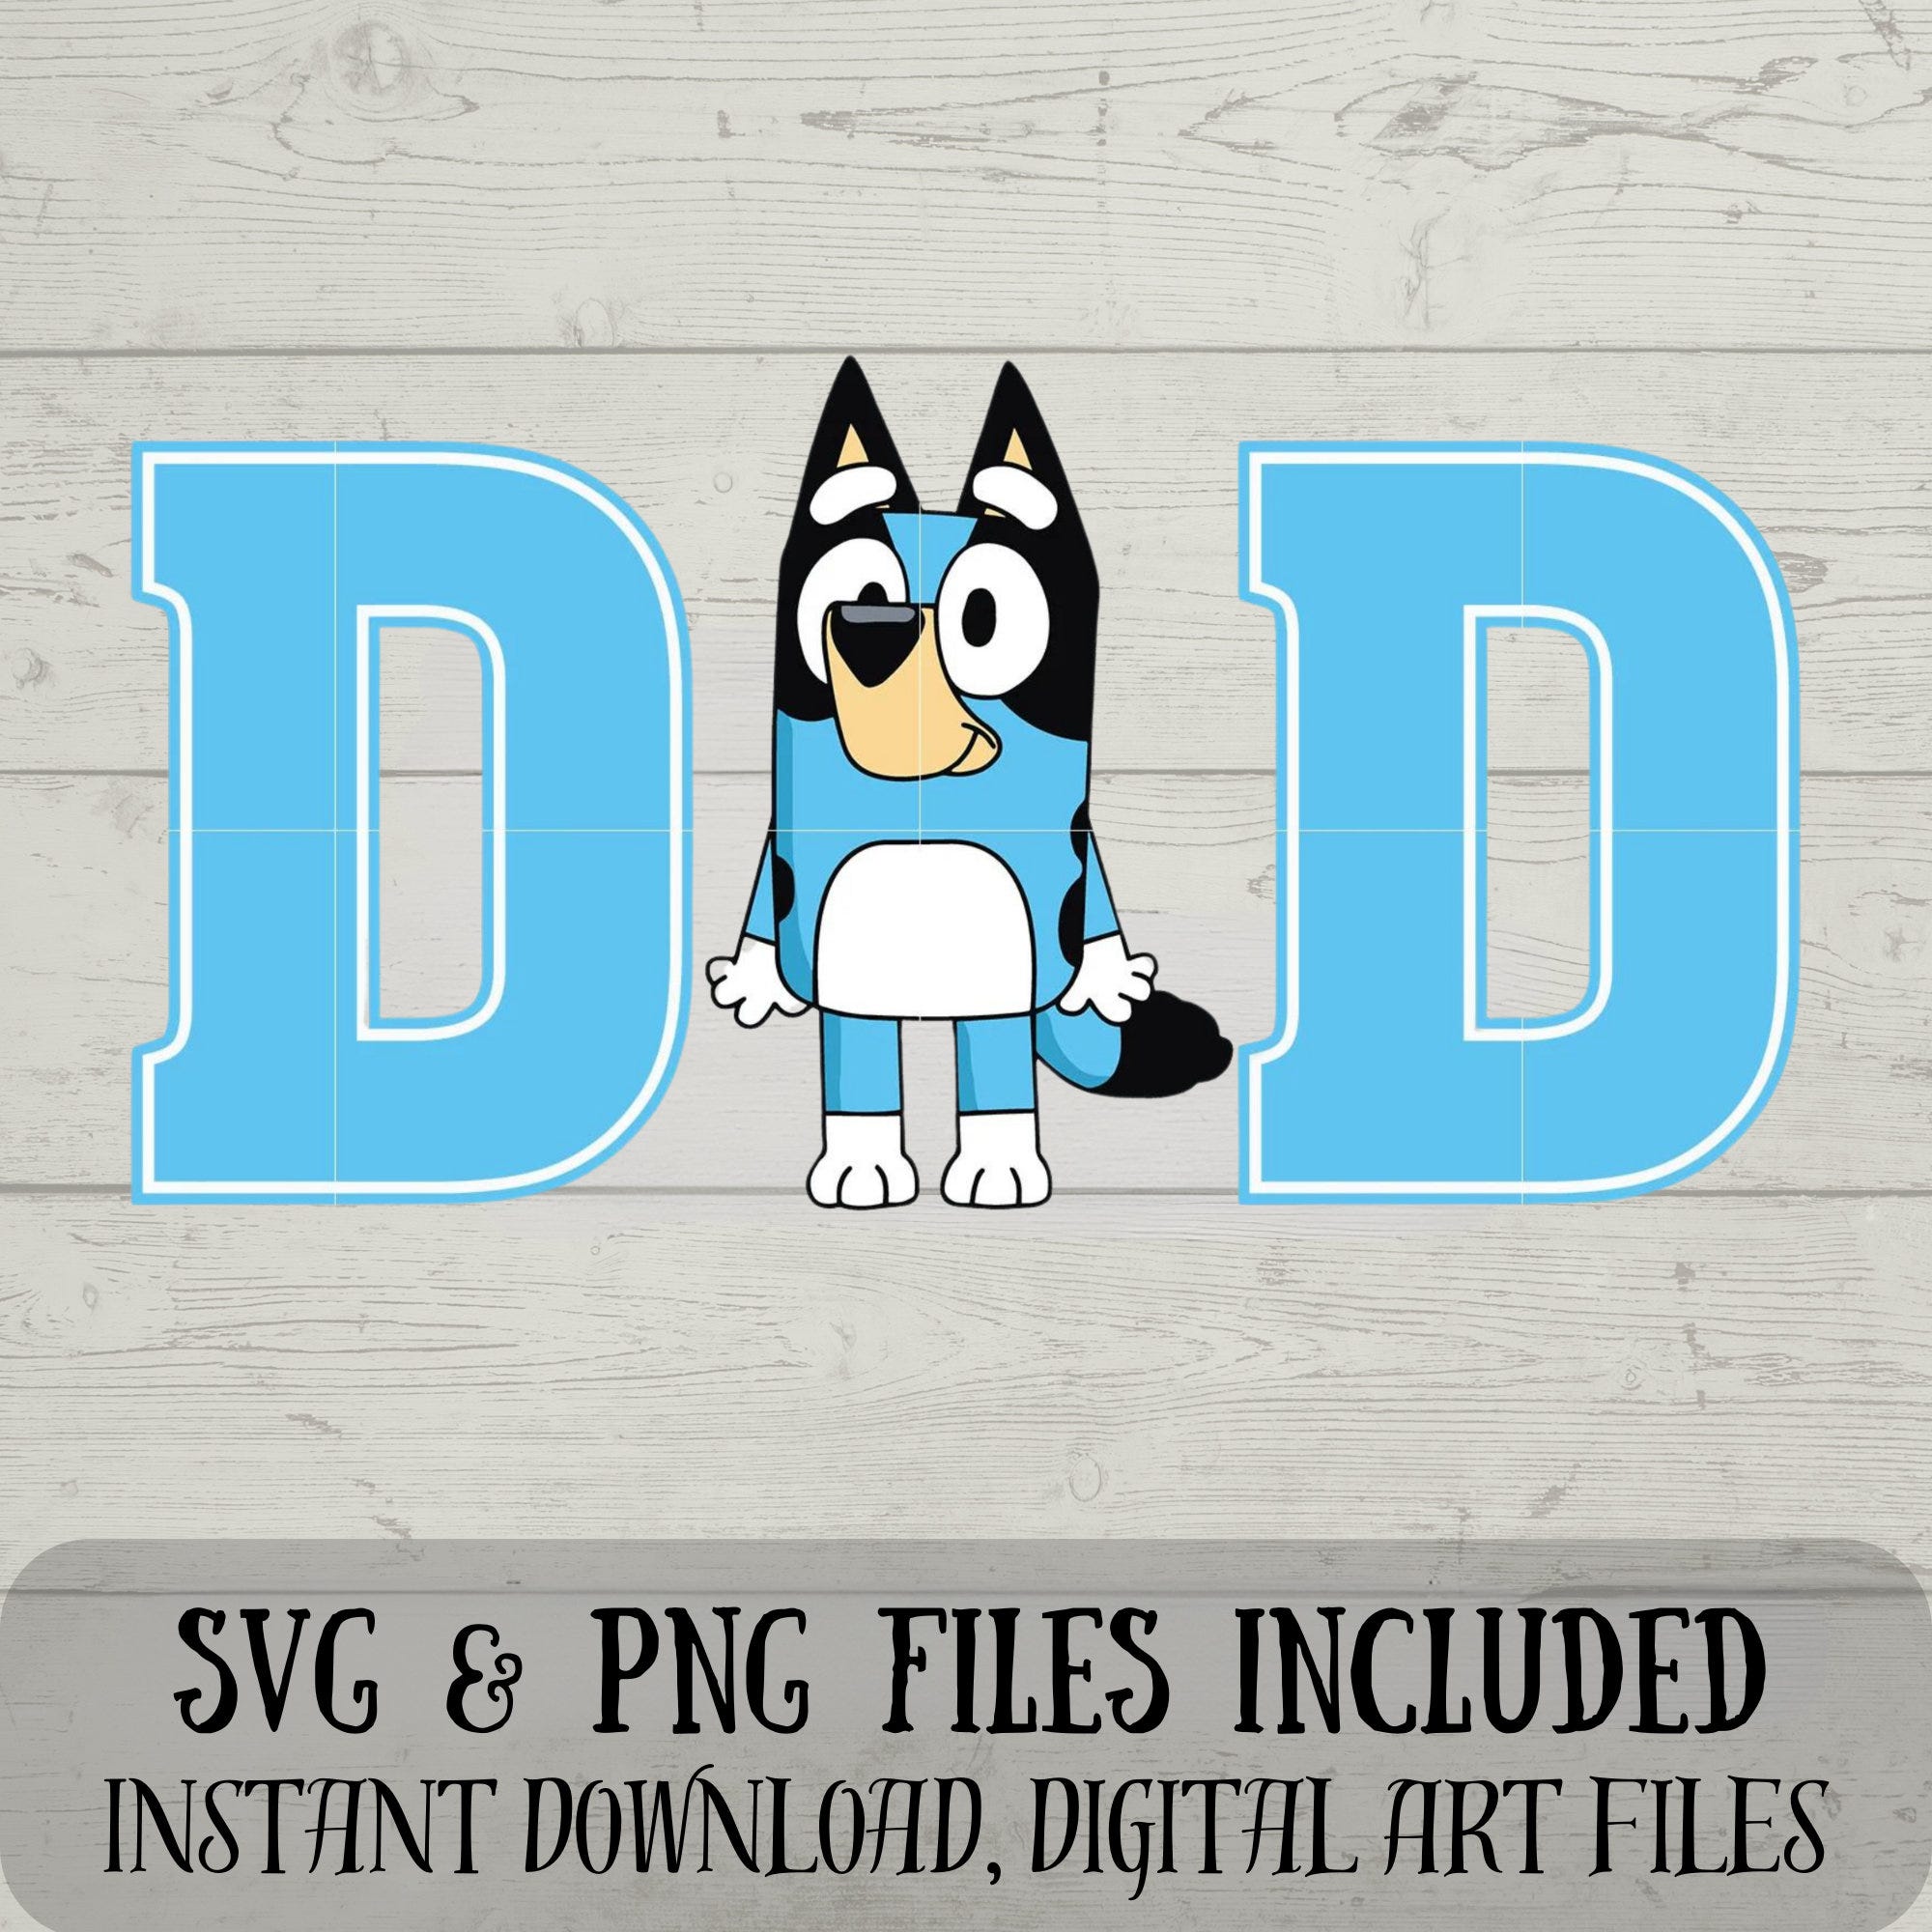 DAD SVG - Bluey SVG - Best Dad Svg - Digital Download Fun with Crafting - svg and png files included